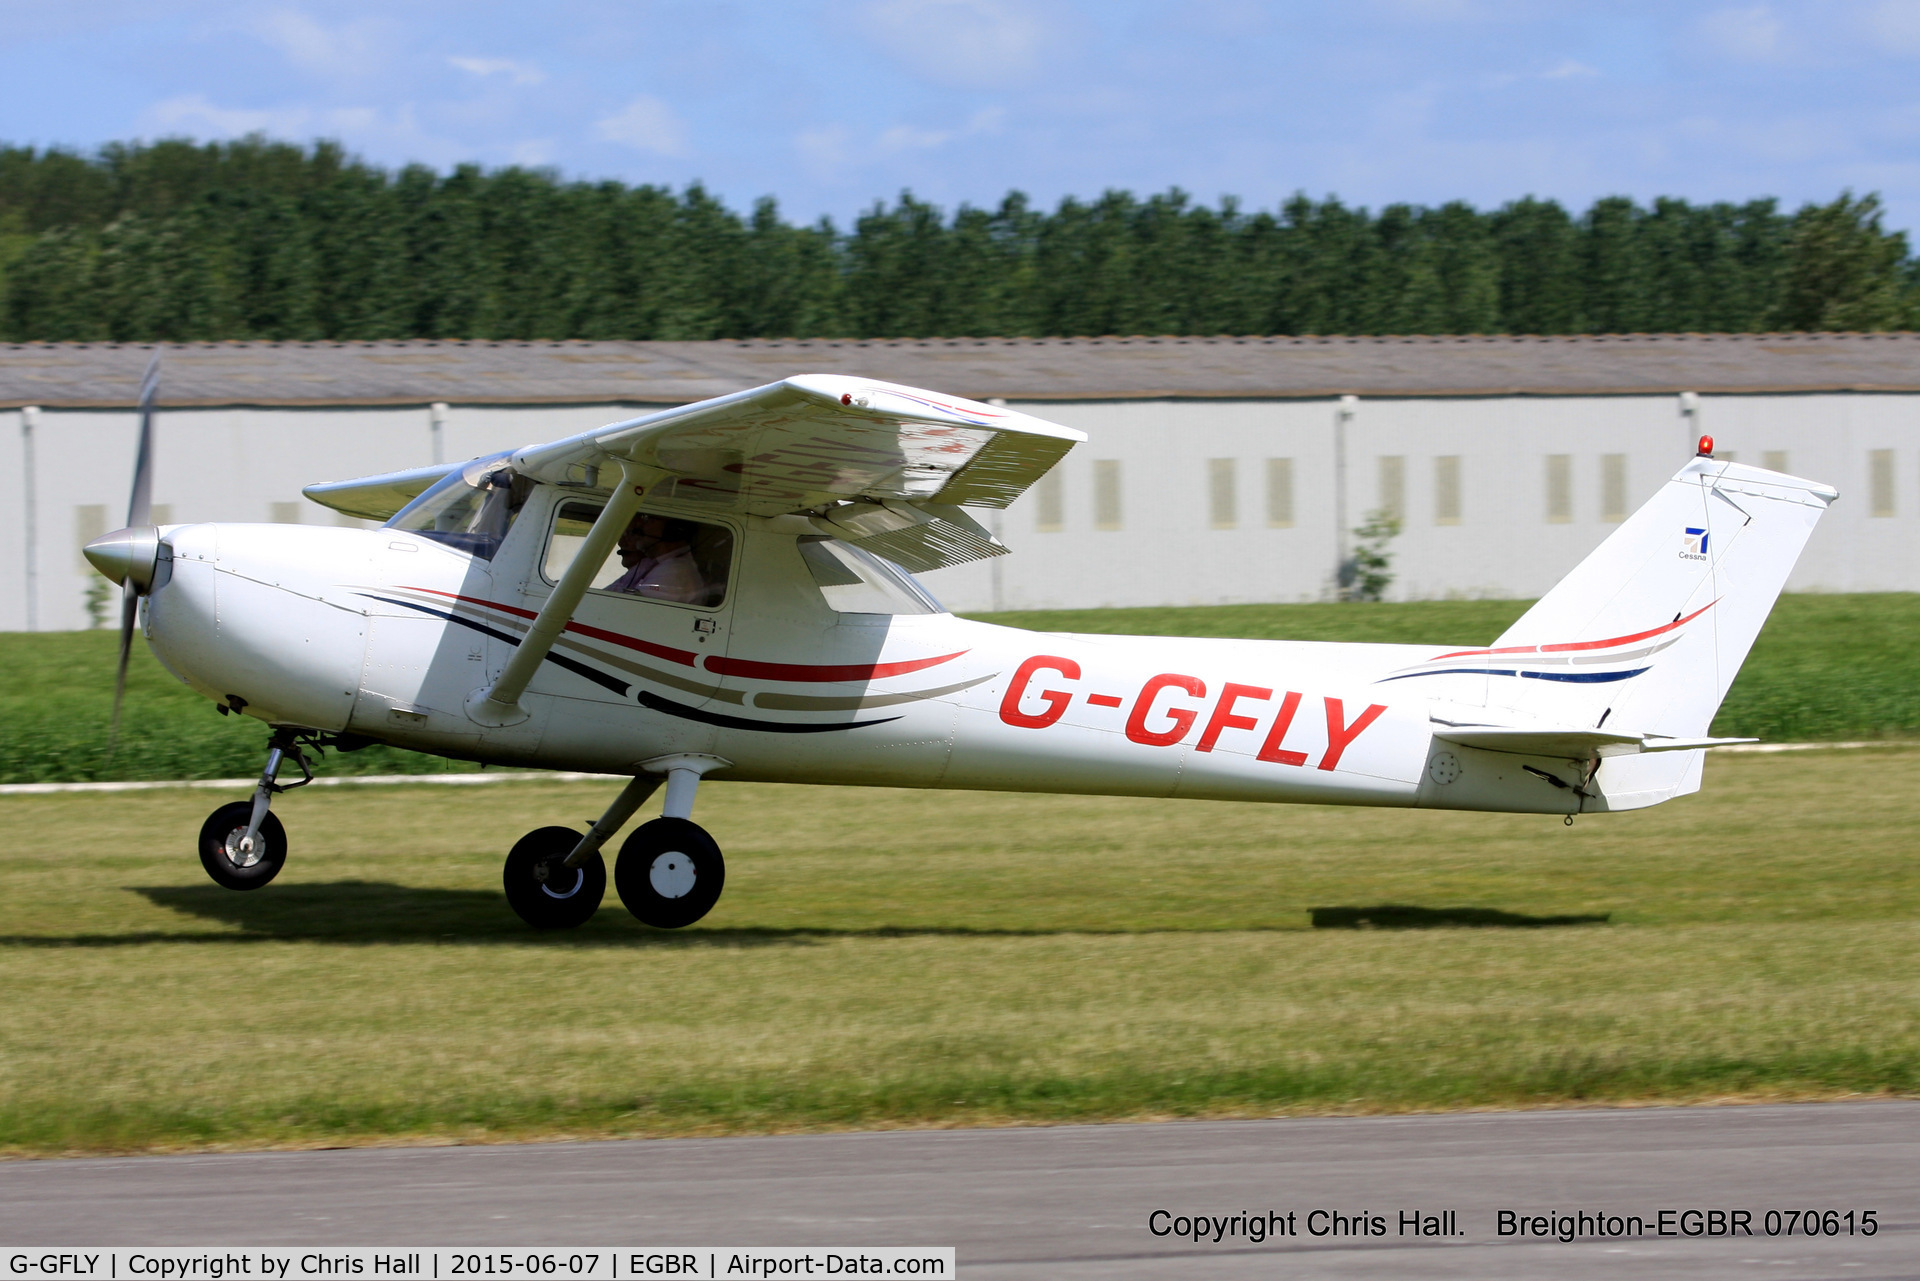 G-GFLY, 1972 Reims F150L C/N 0822, at Breighton's Summer fly in